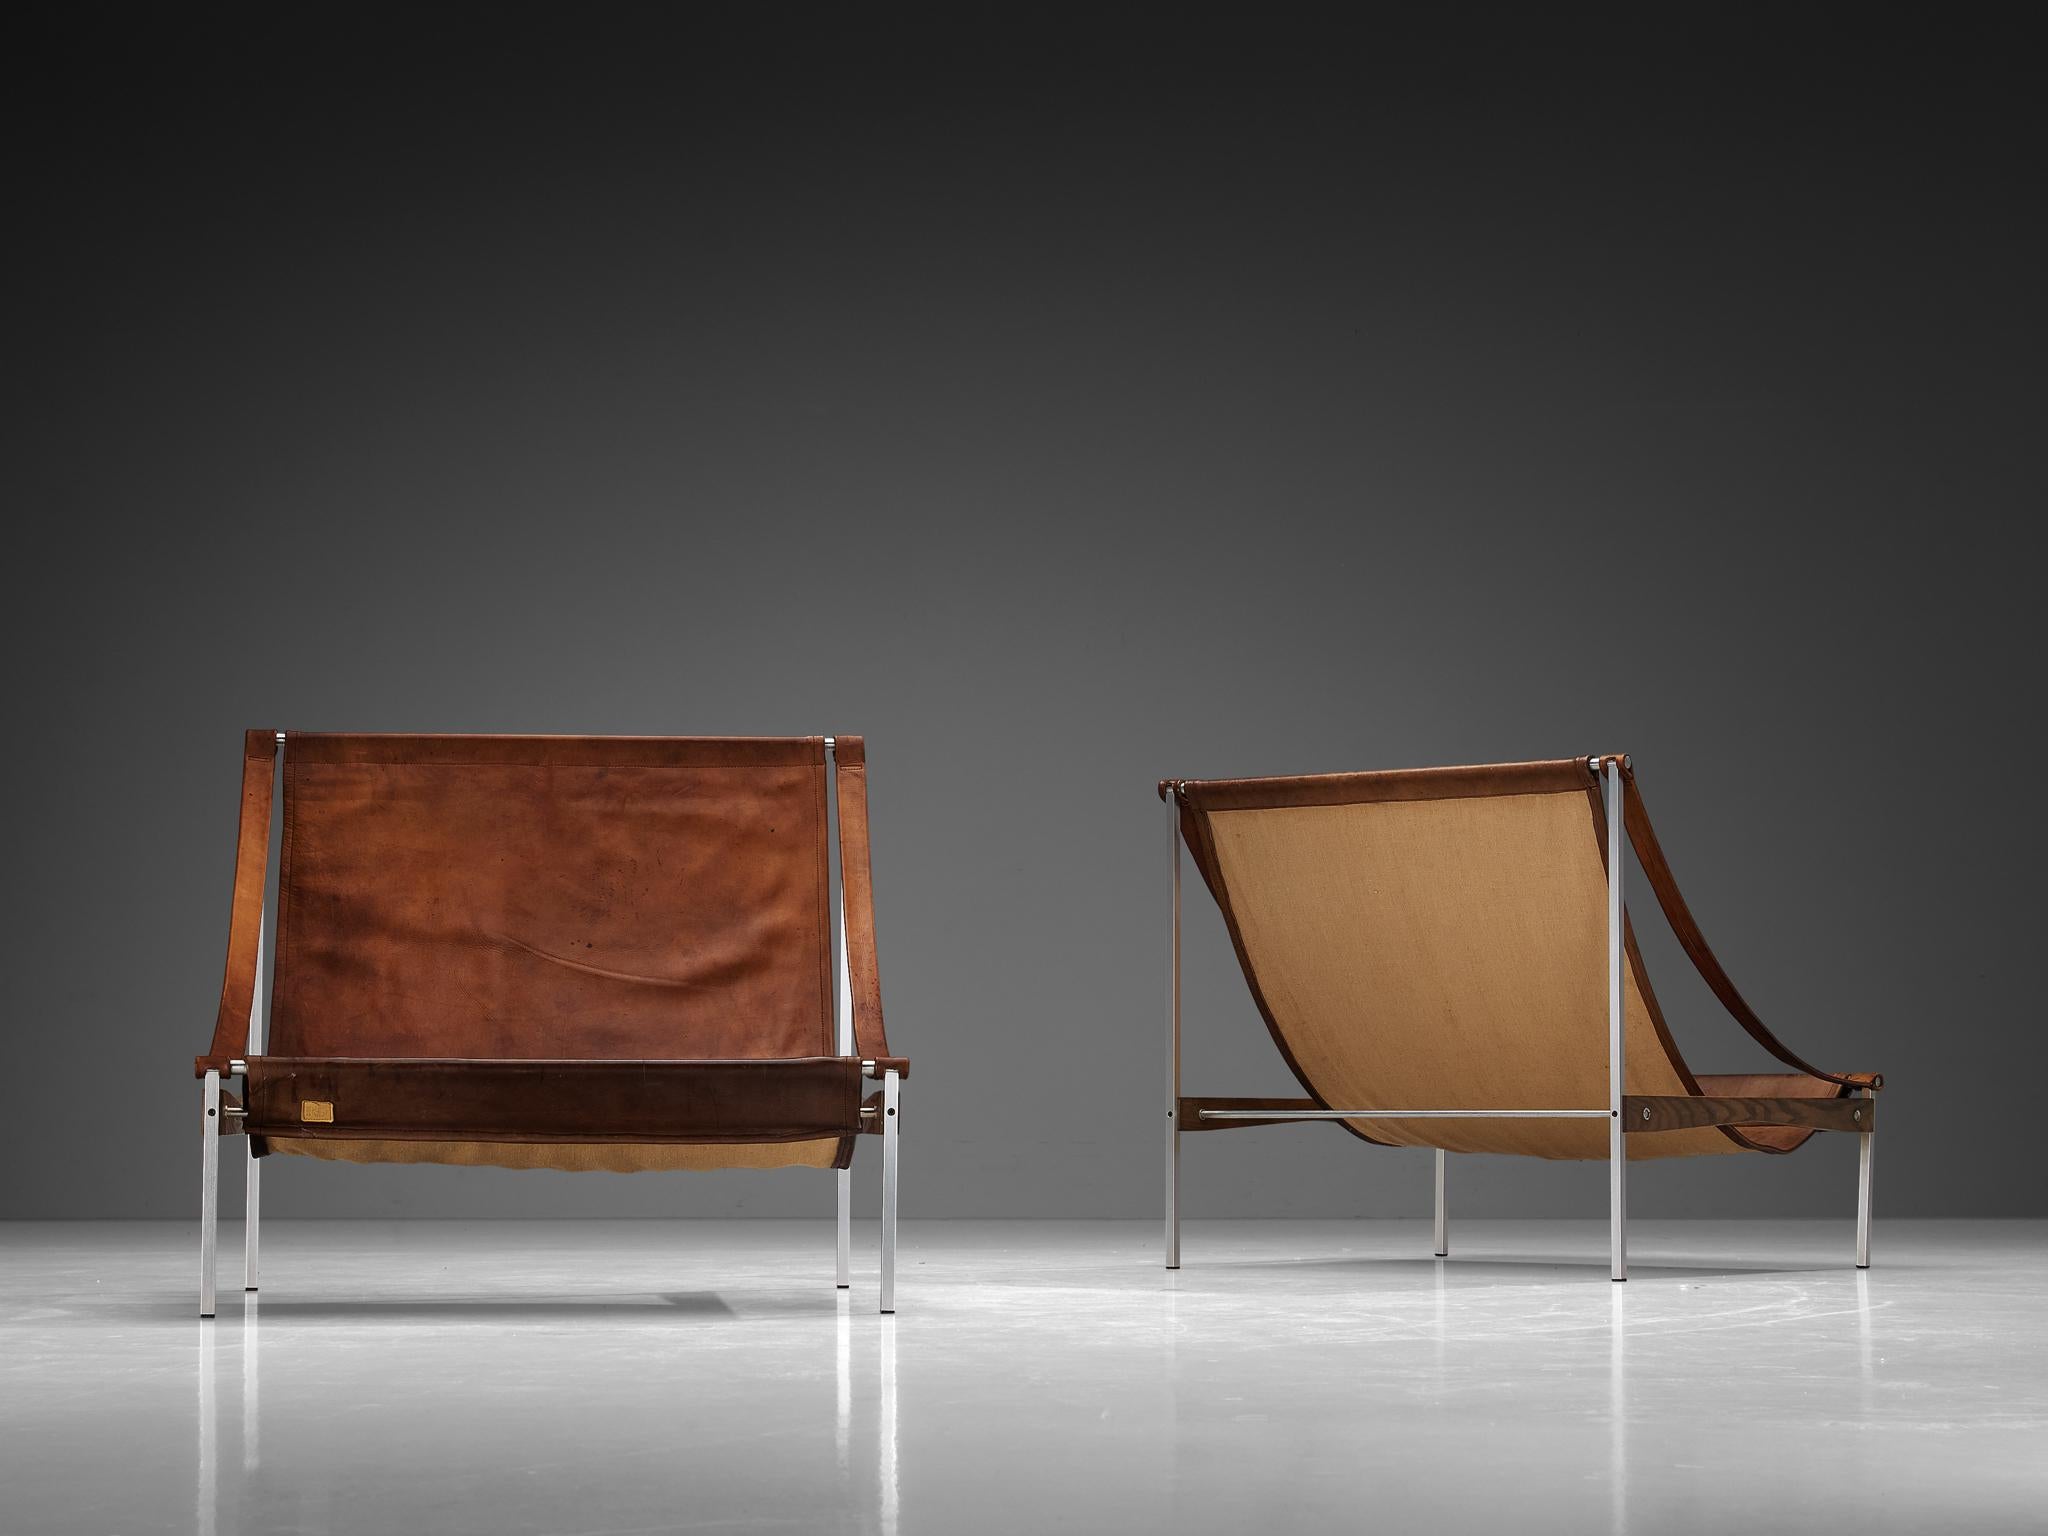 Aluminum Rare Stig Poulsson Pair of 'Bequem' Lounge Chairs in Brown Leather 